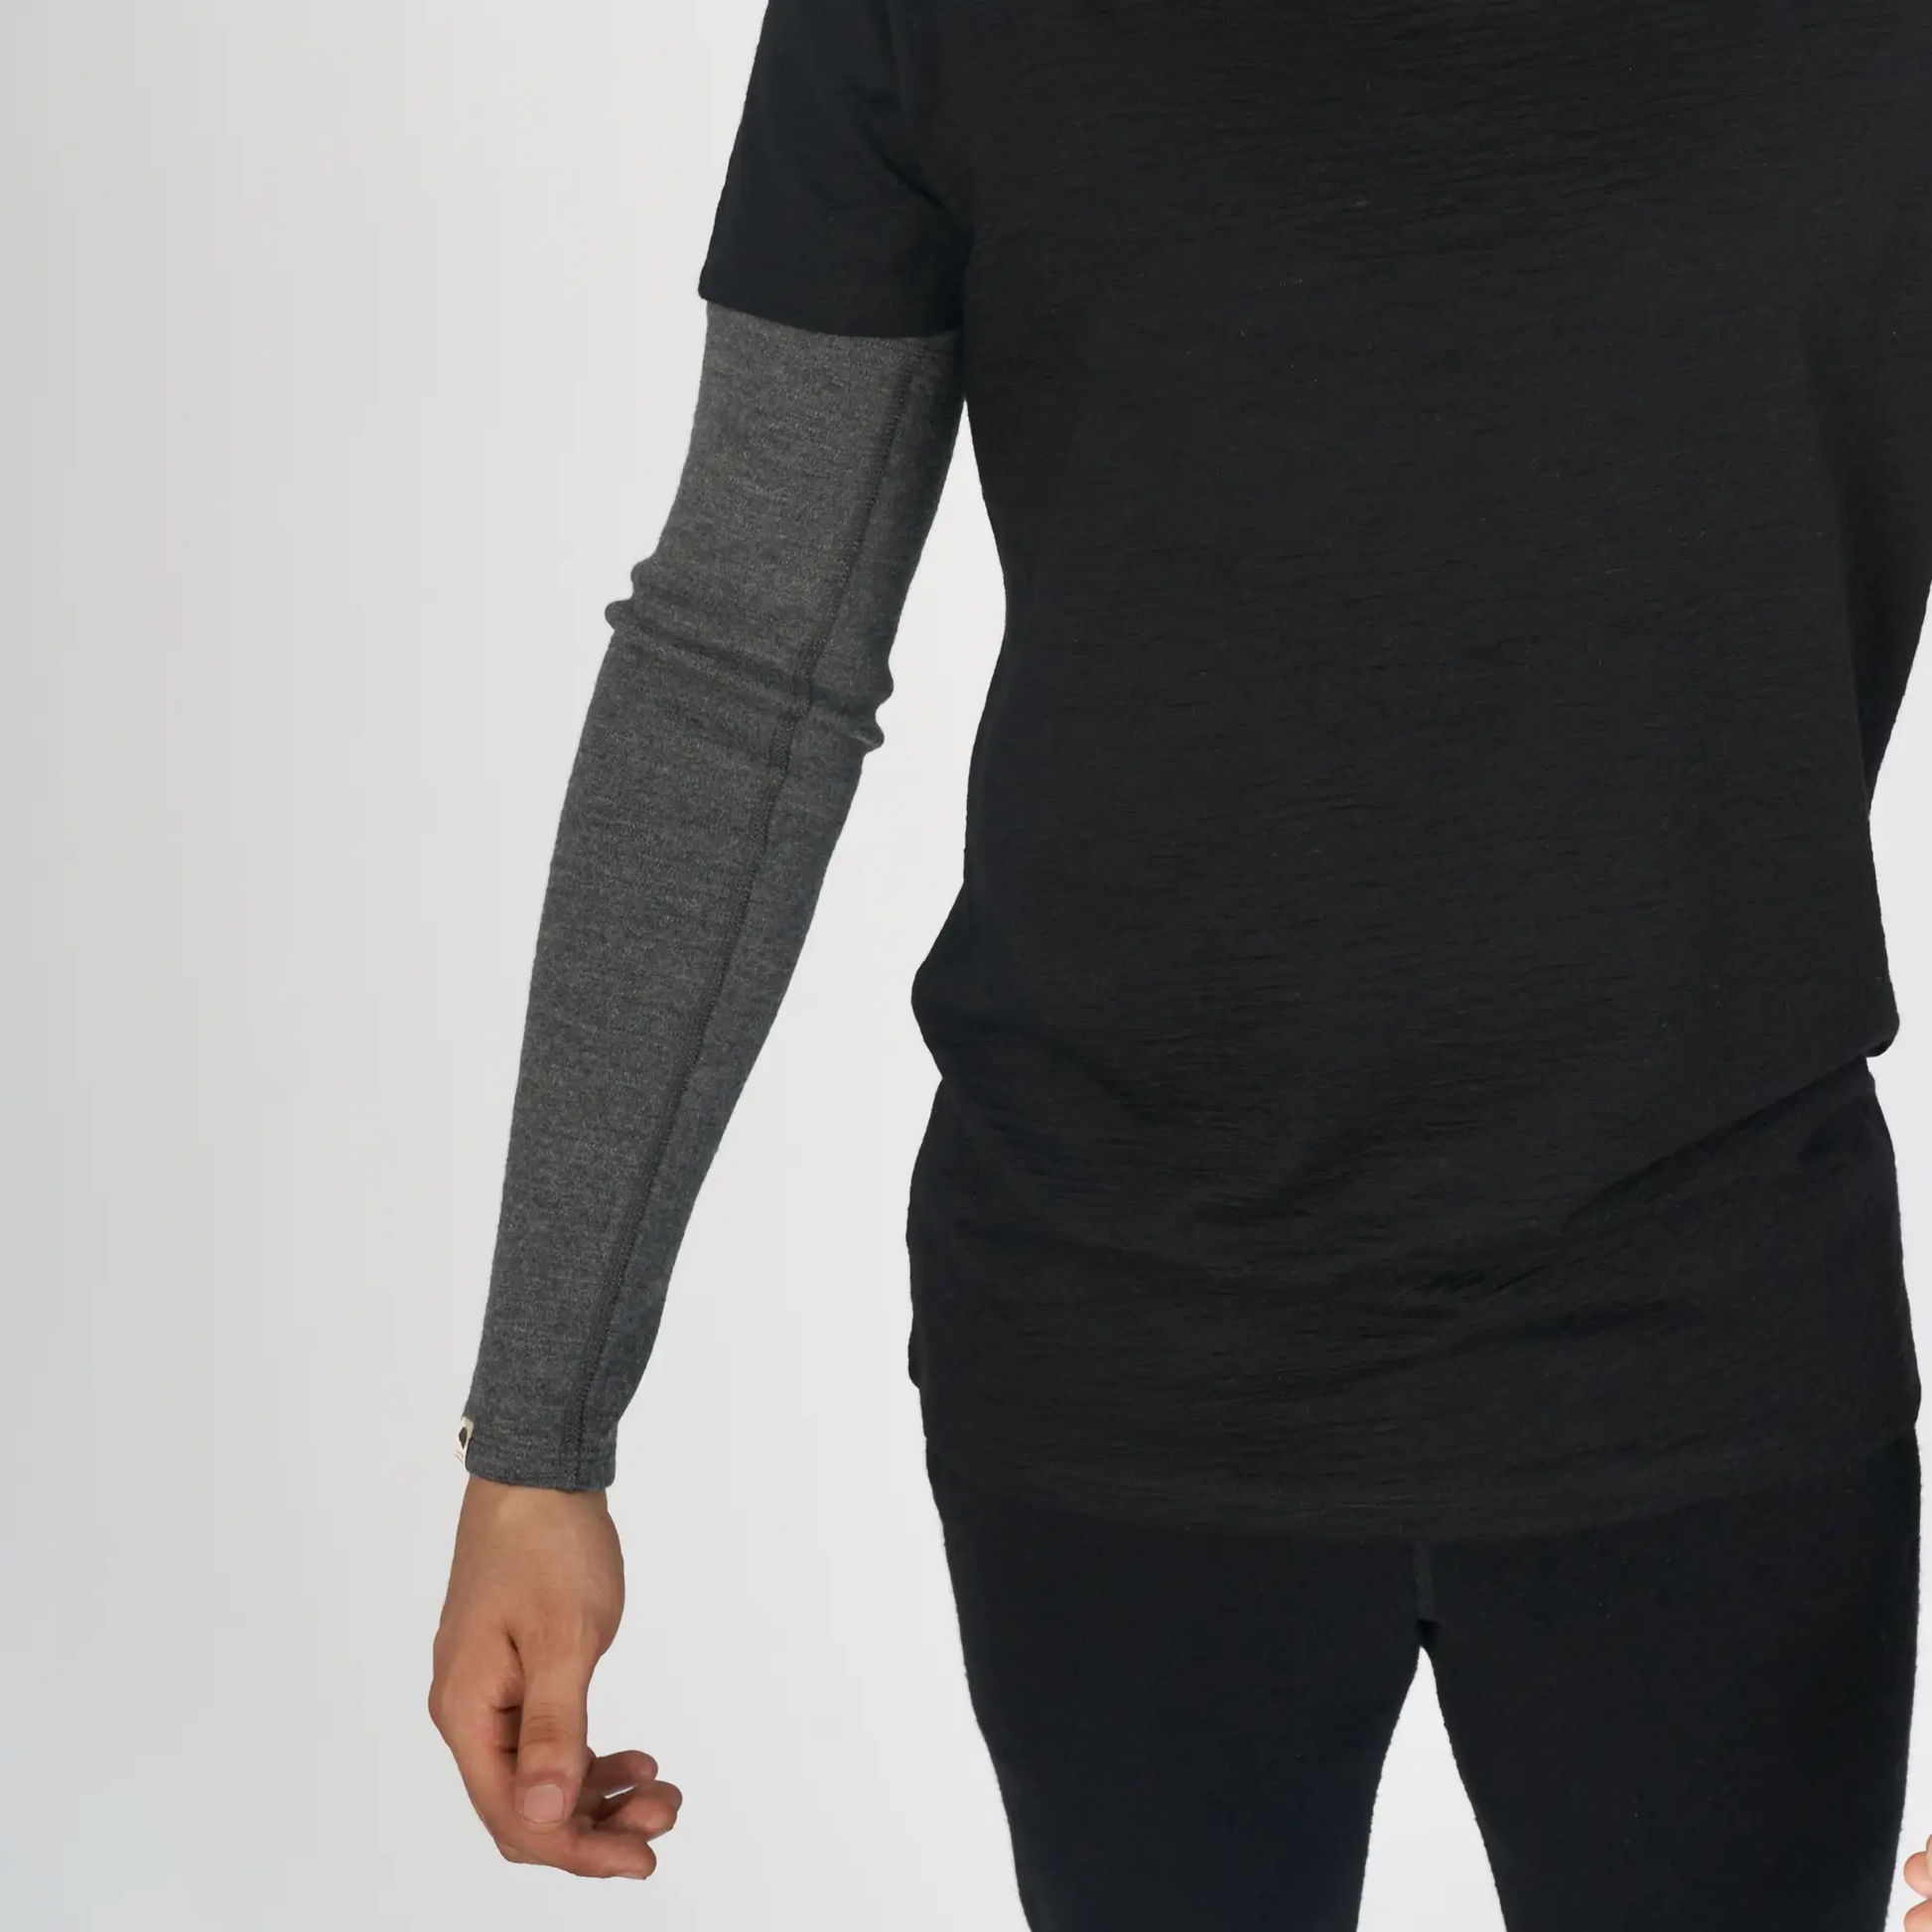 mens all natural sleeve color gray